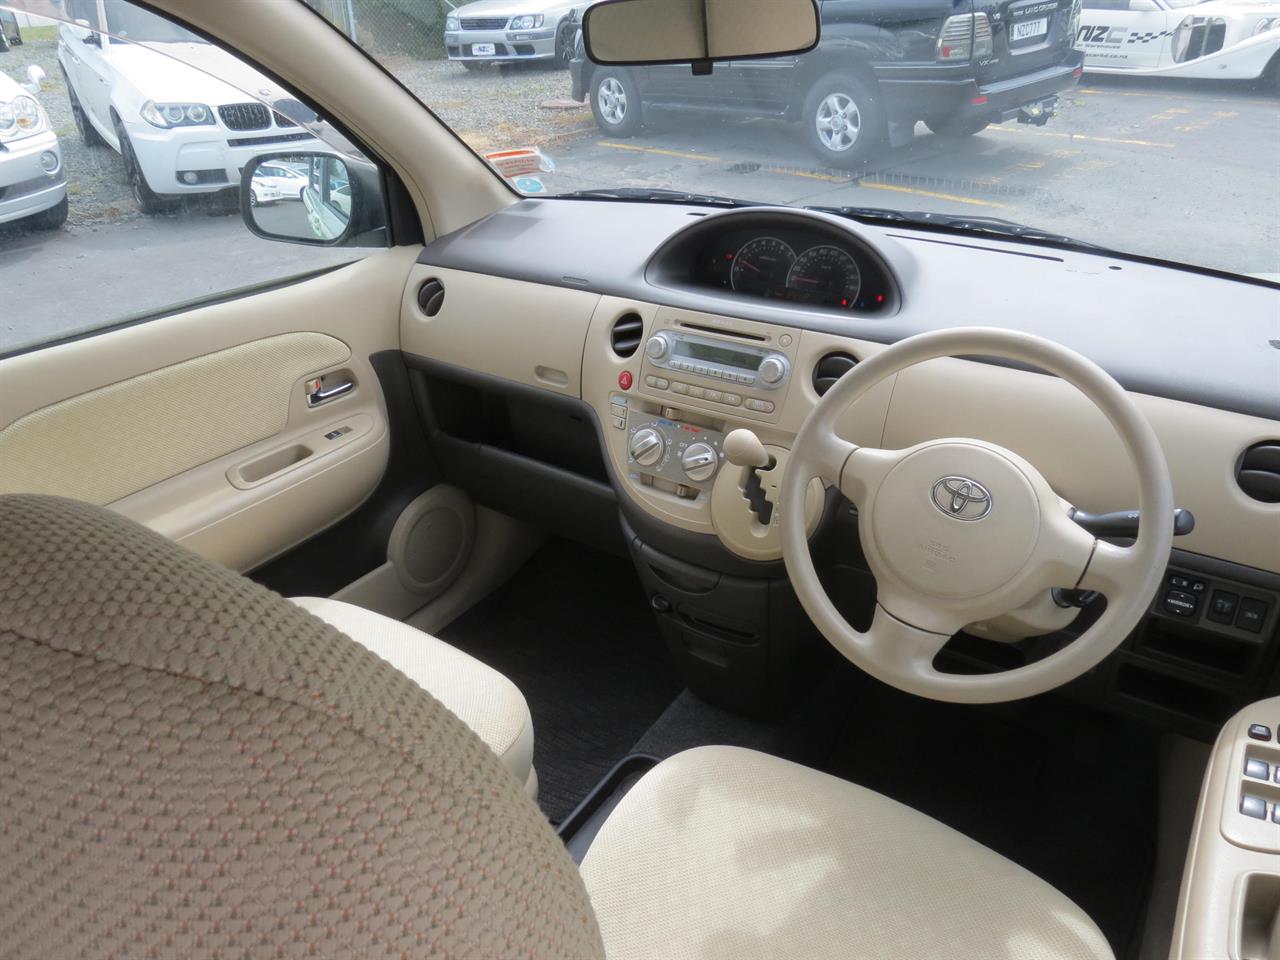 2009 Toyota Sienta only $23 weekly